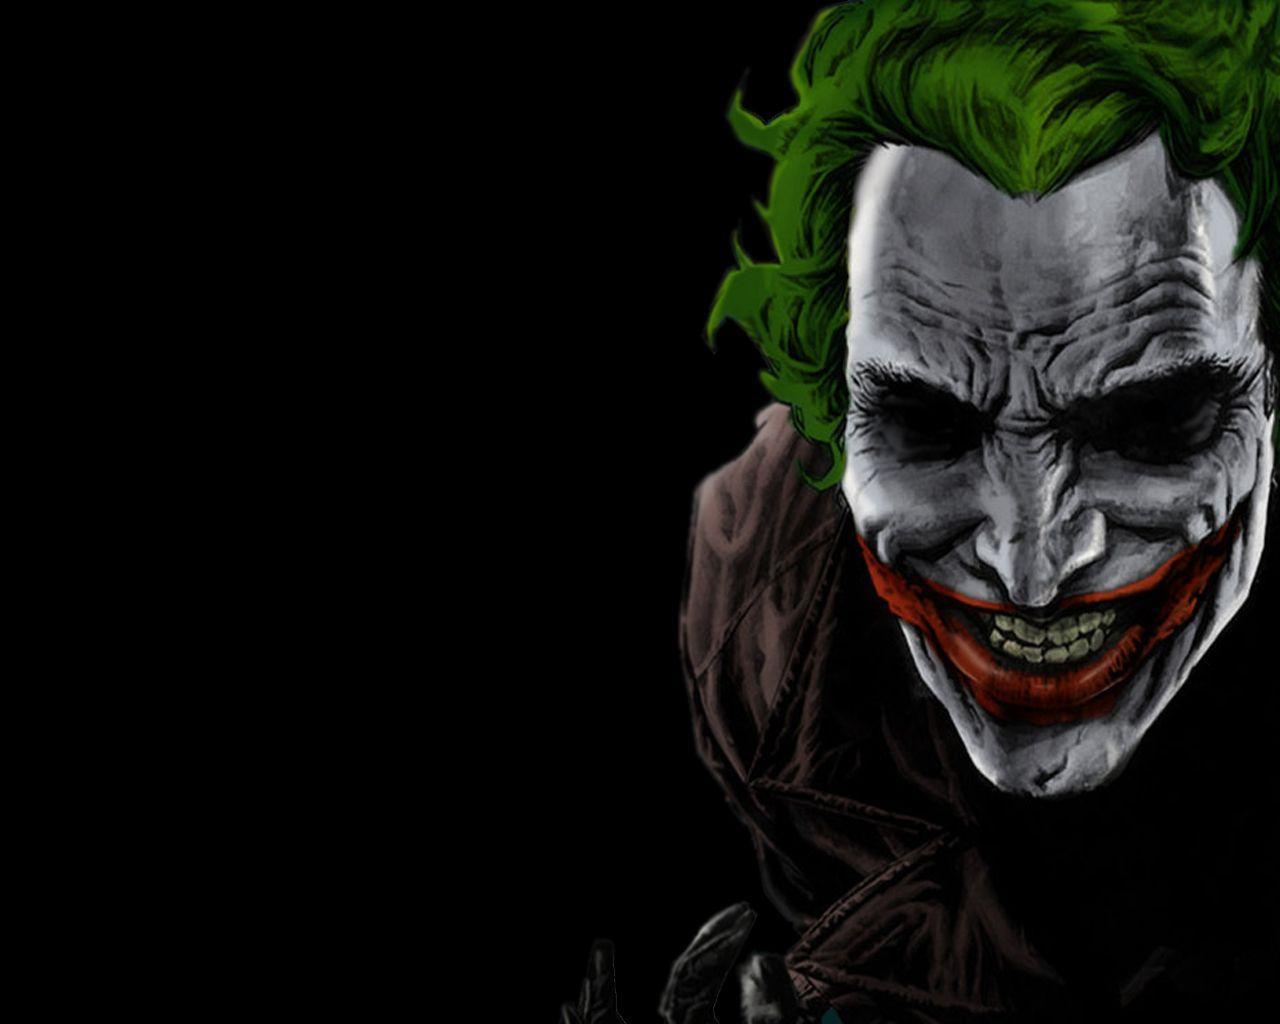 The Joker high resolution picture. Wallpapernesia